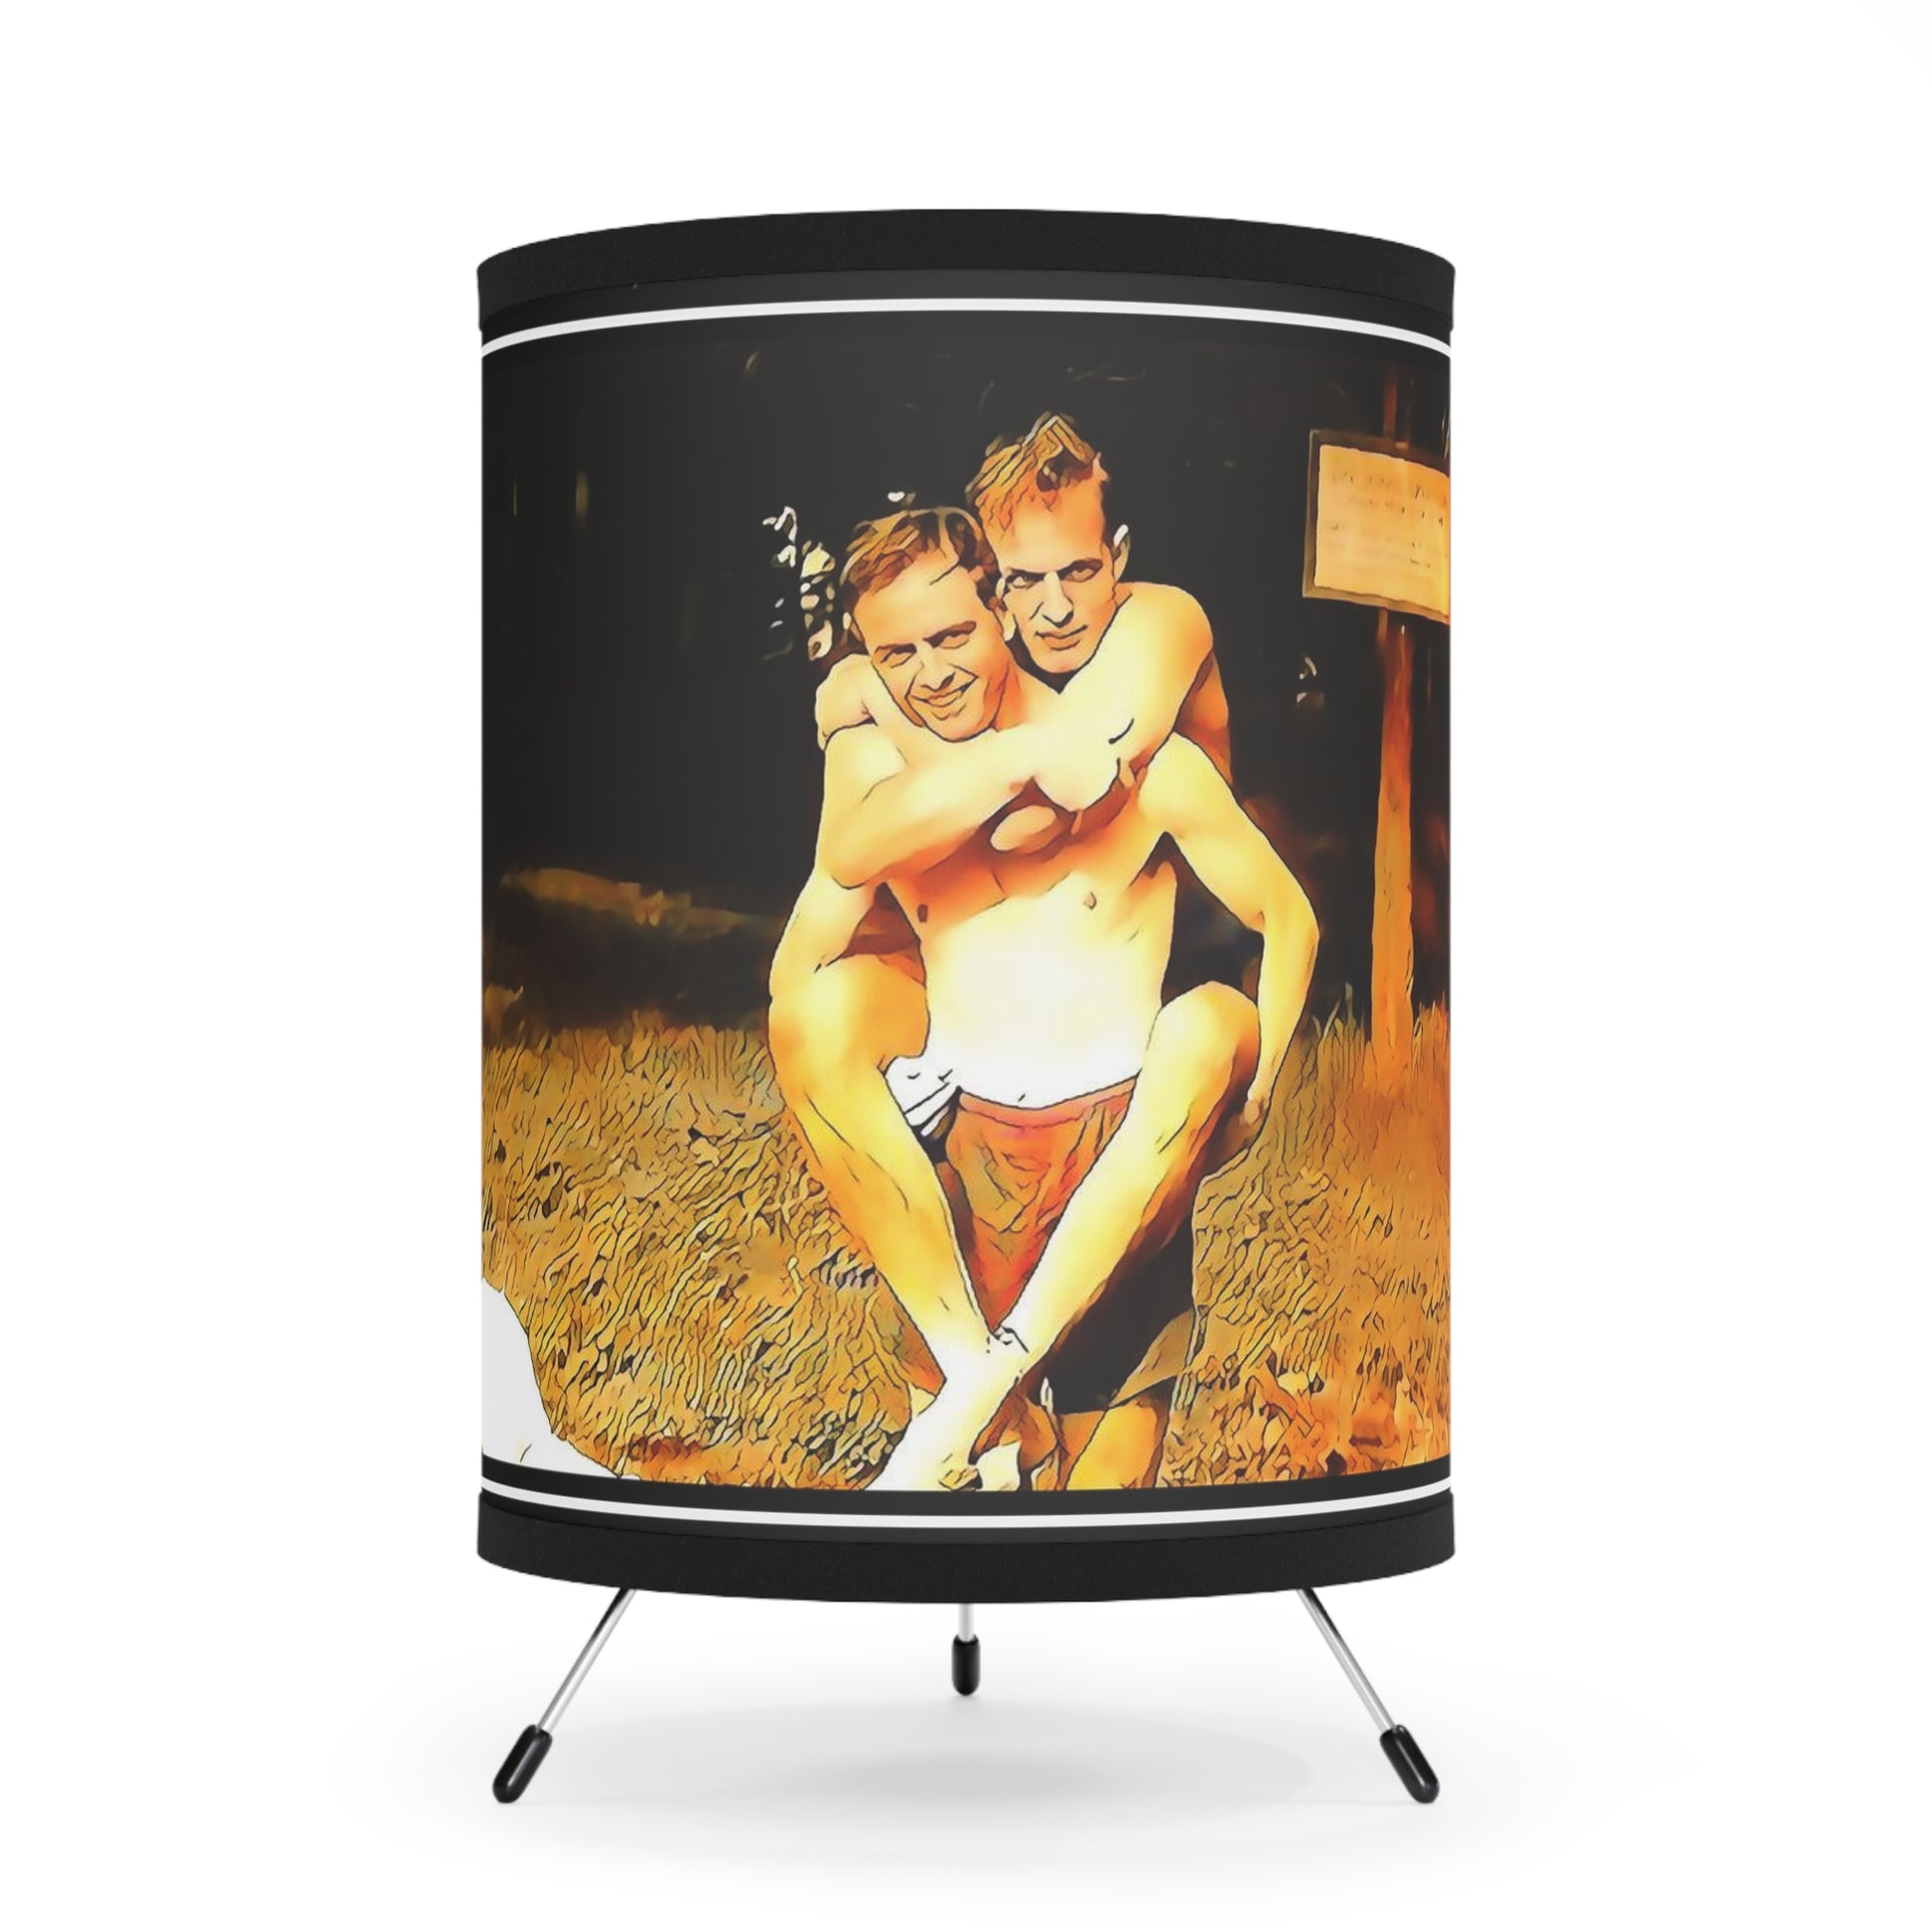 nager 009 | Tripod Lamp Vintage Road Trip Gay Swim Suit Swimming Lake LGBTQ Queer Couple Dad Gift